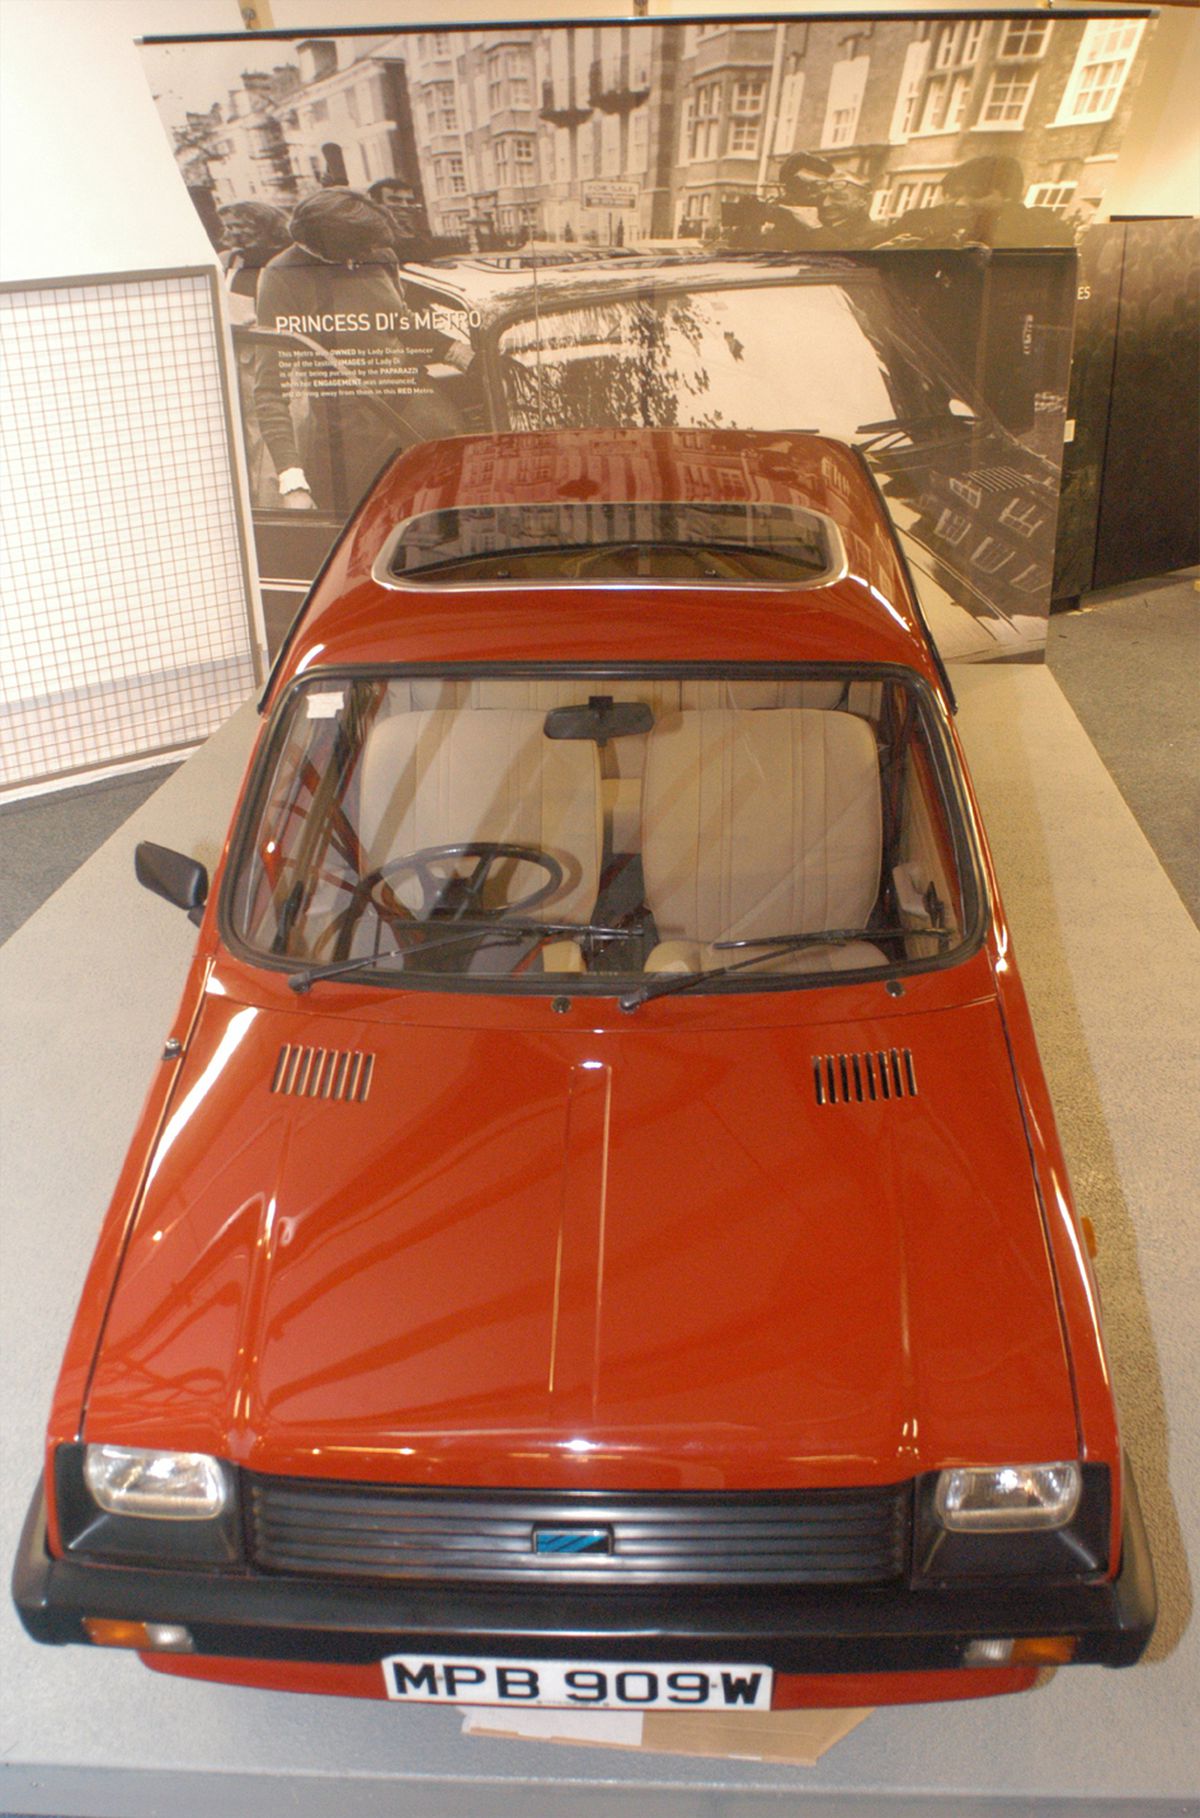 Princess Diana's Metro on display at Coventry Transport Museum